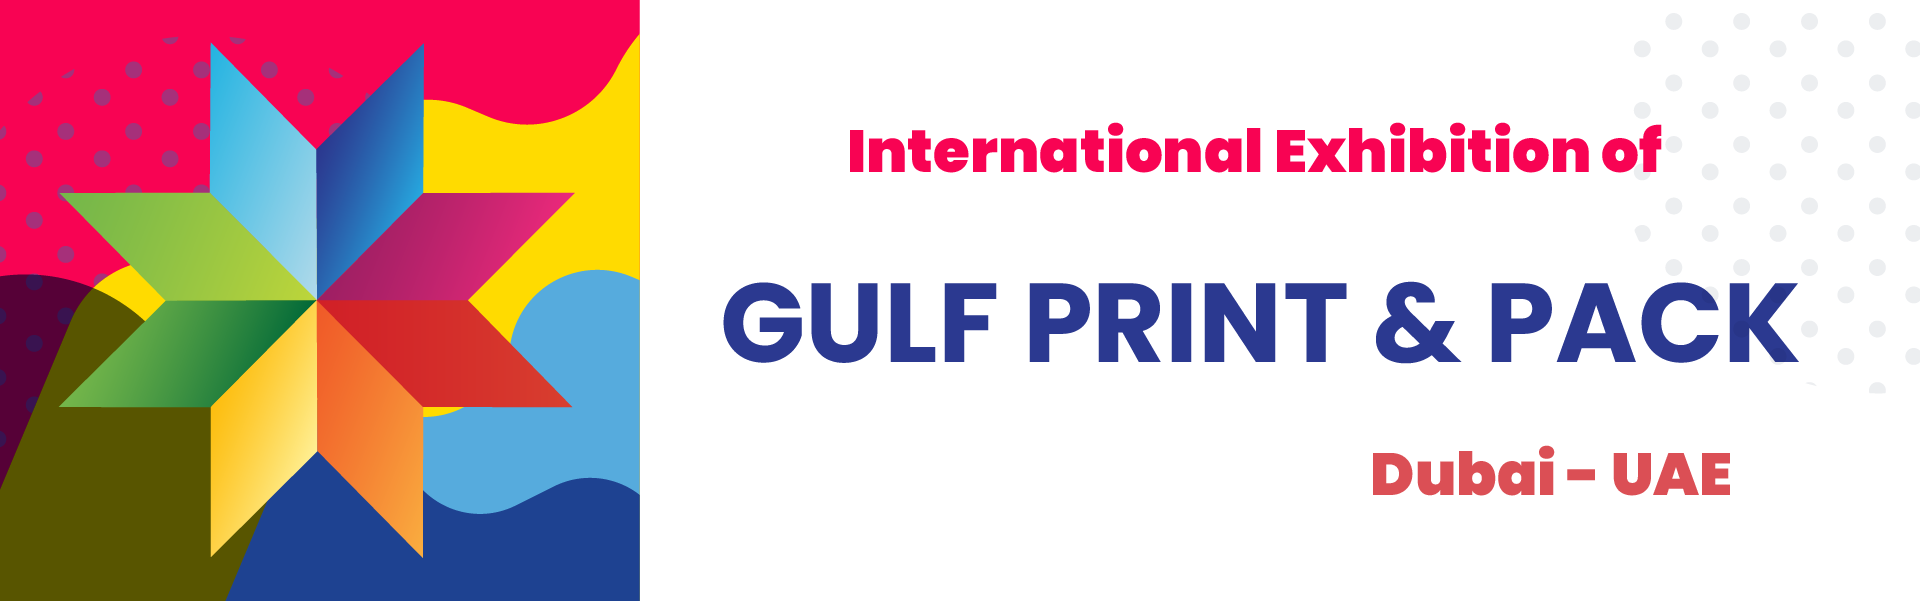 printing and packing exhibition Dubai